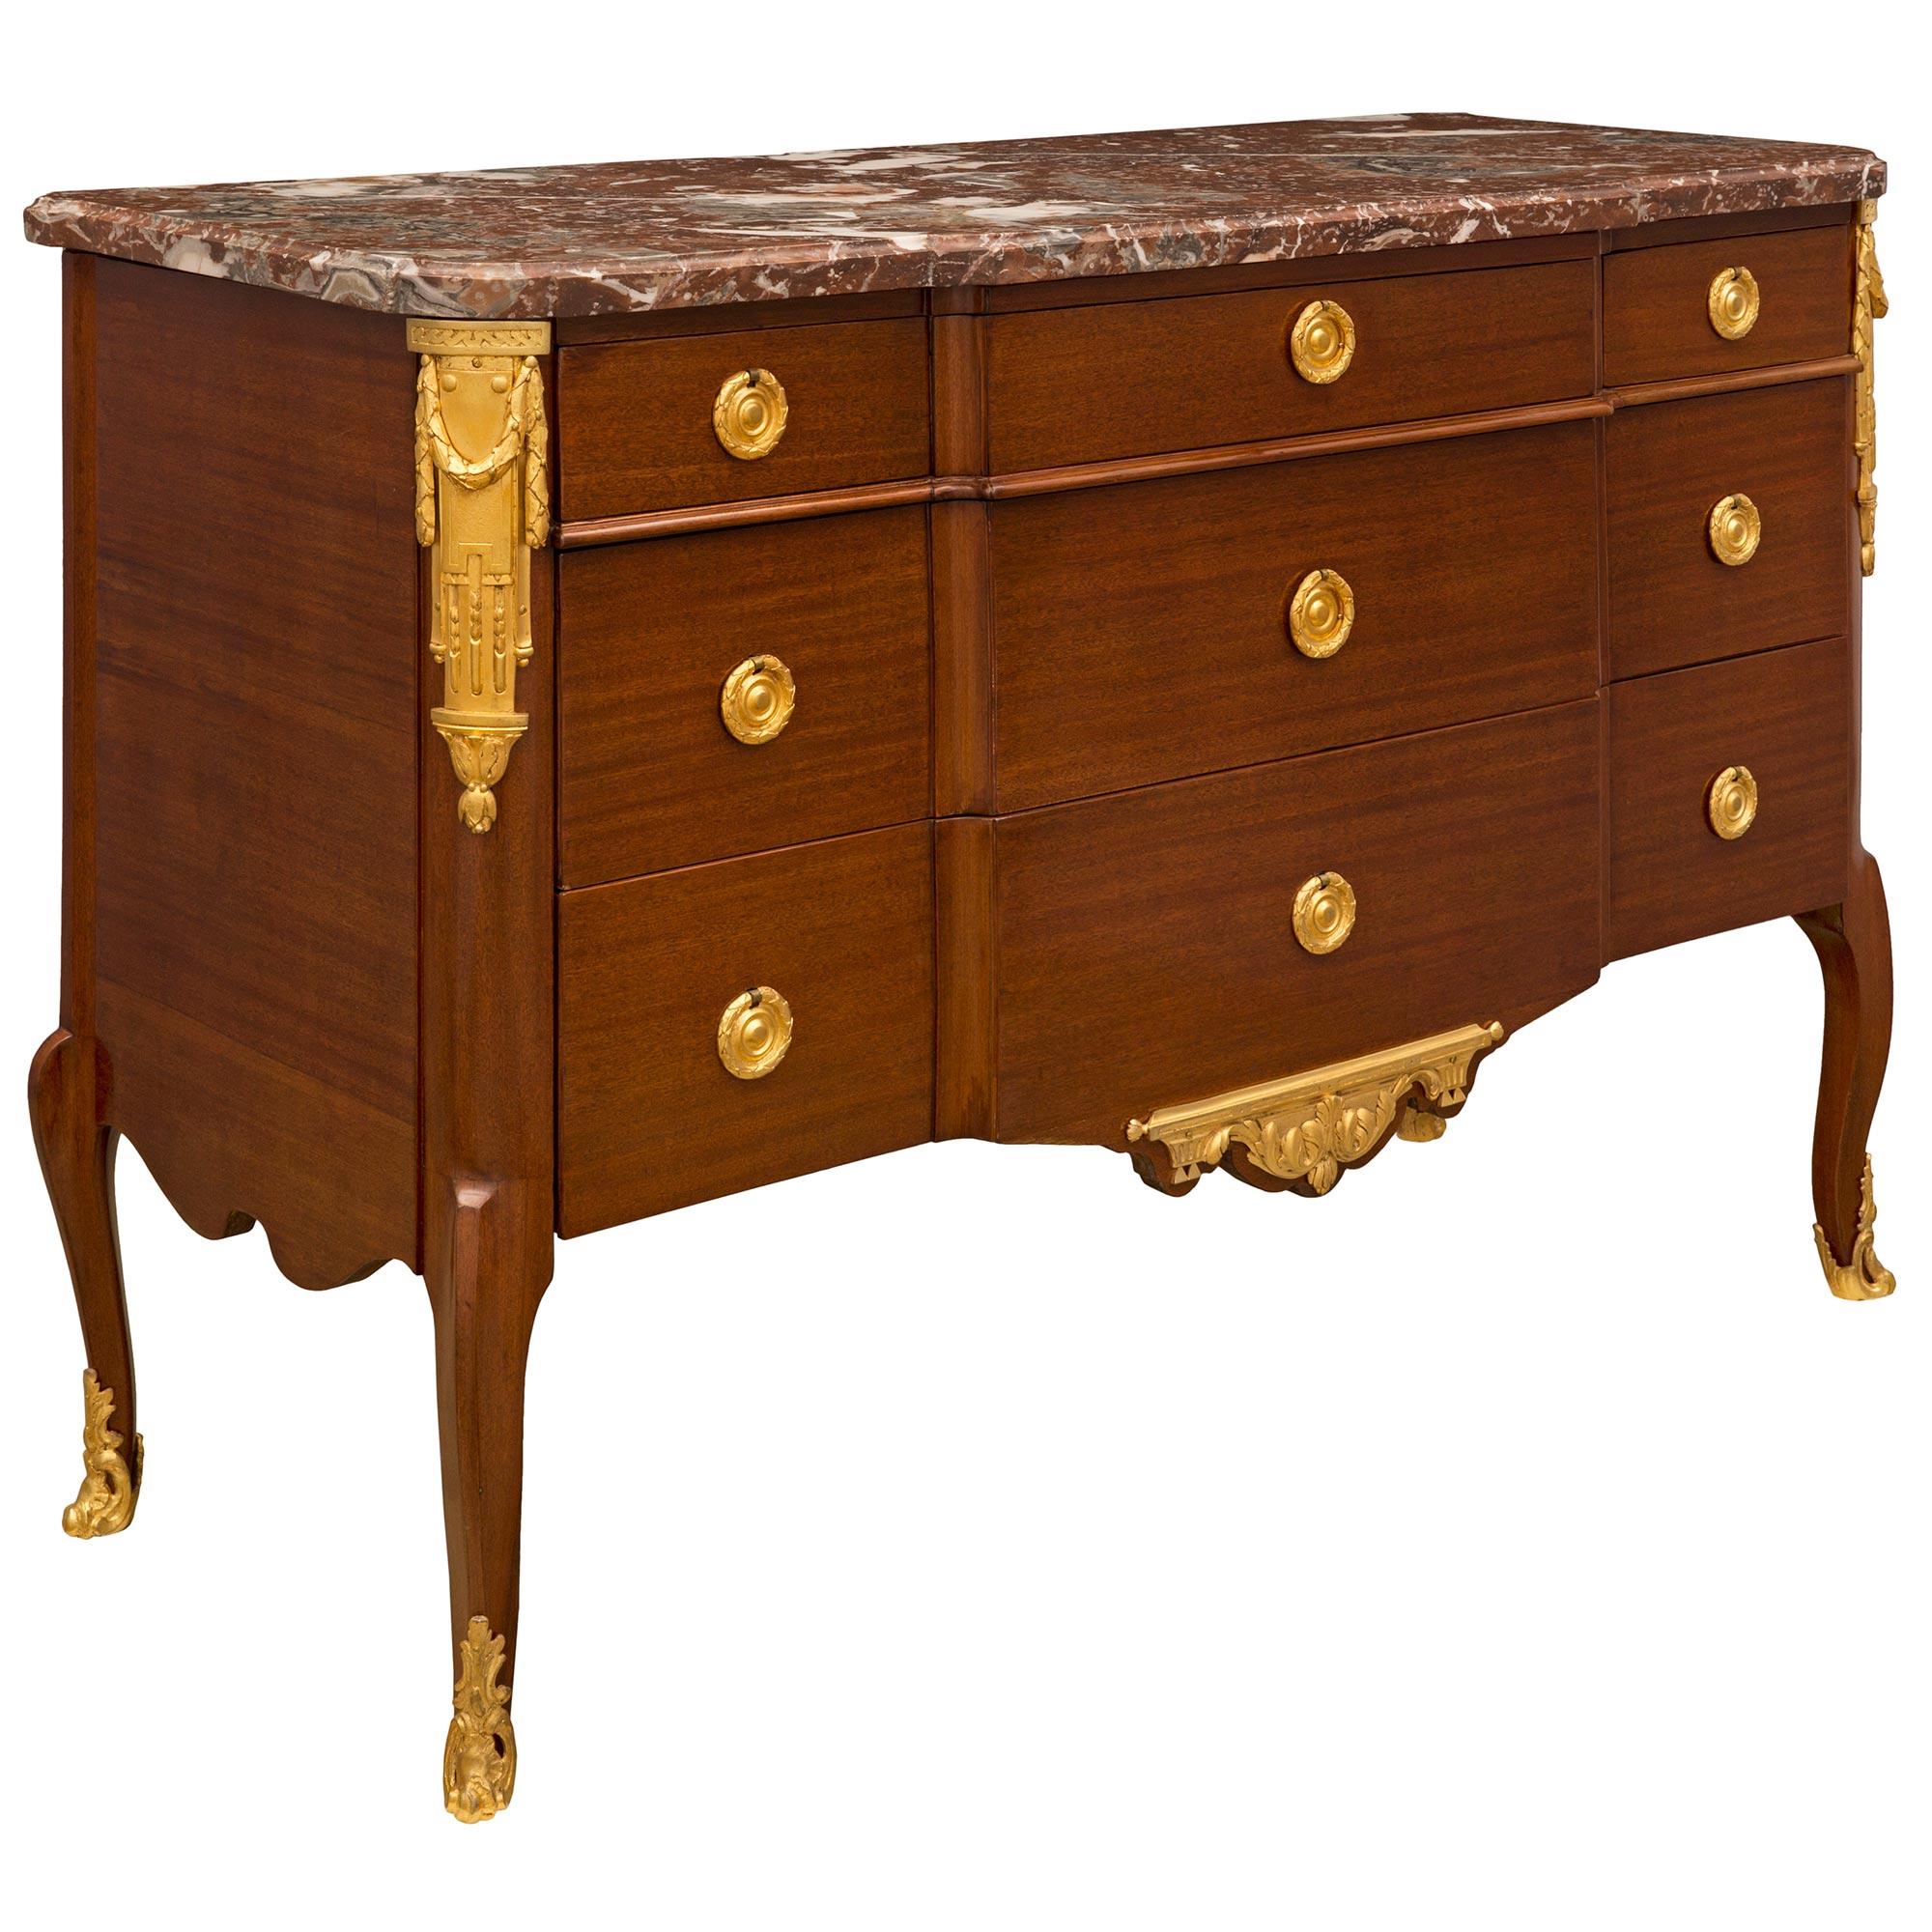 French 19th Century Transitional Style Mahogany and Ormolu Commode In Good Condition For Sale In West Palm Beach, FL